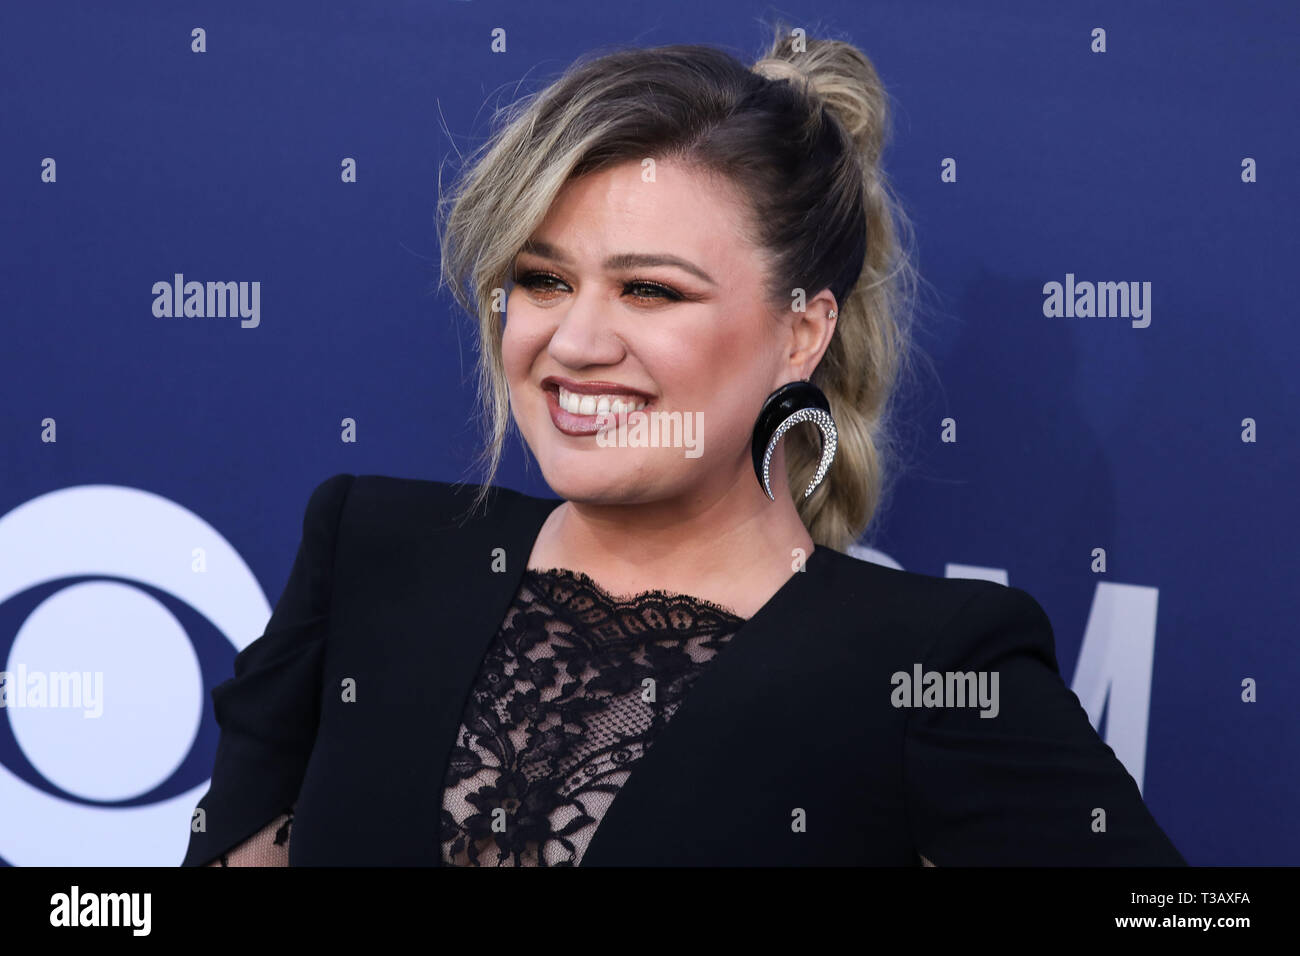 Las Vegas, United States. 07th Apr, 2019. LAS VEGAS, NEVADA, USA - APRIL 07: Singer Kelly Clarkson wearing an Alexander McQueen dress, Yves Saint Laurent earrings, and Balmain shoes arrives at the 54th Academy Of Country Music Awards held at the MGM Grand Garden Arena on April 7, 2019 in Las Vegas, Nevada, United States. (Photo by Xavier Collin/Image Press Agency) Credit: Image Press Agency/Alamy Live News Stock Photo